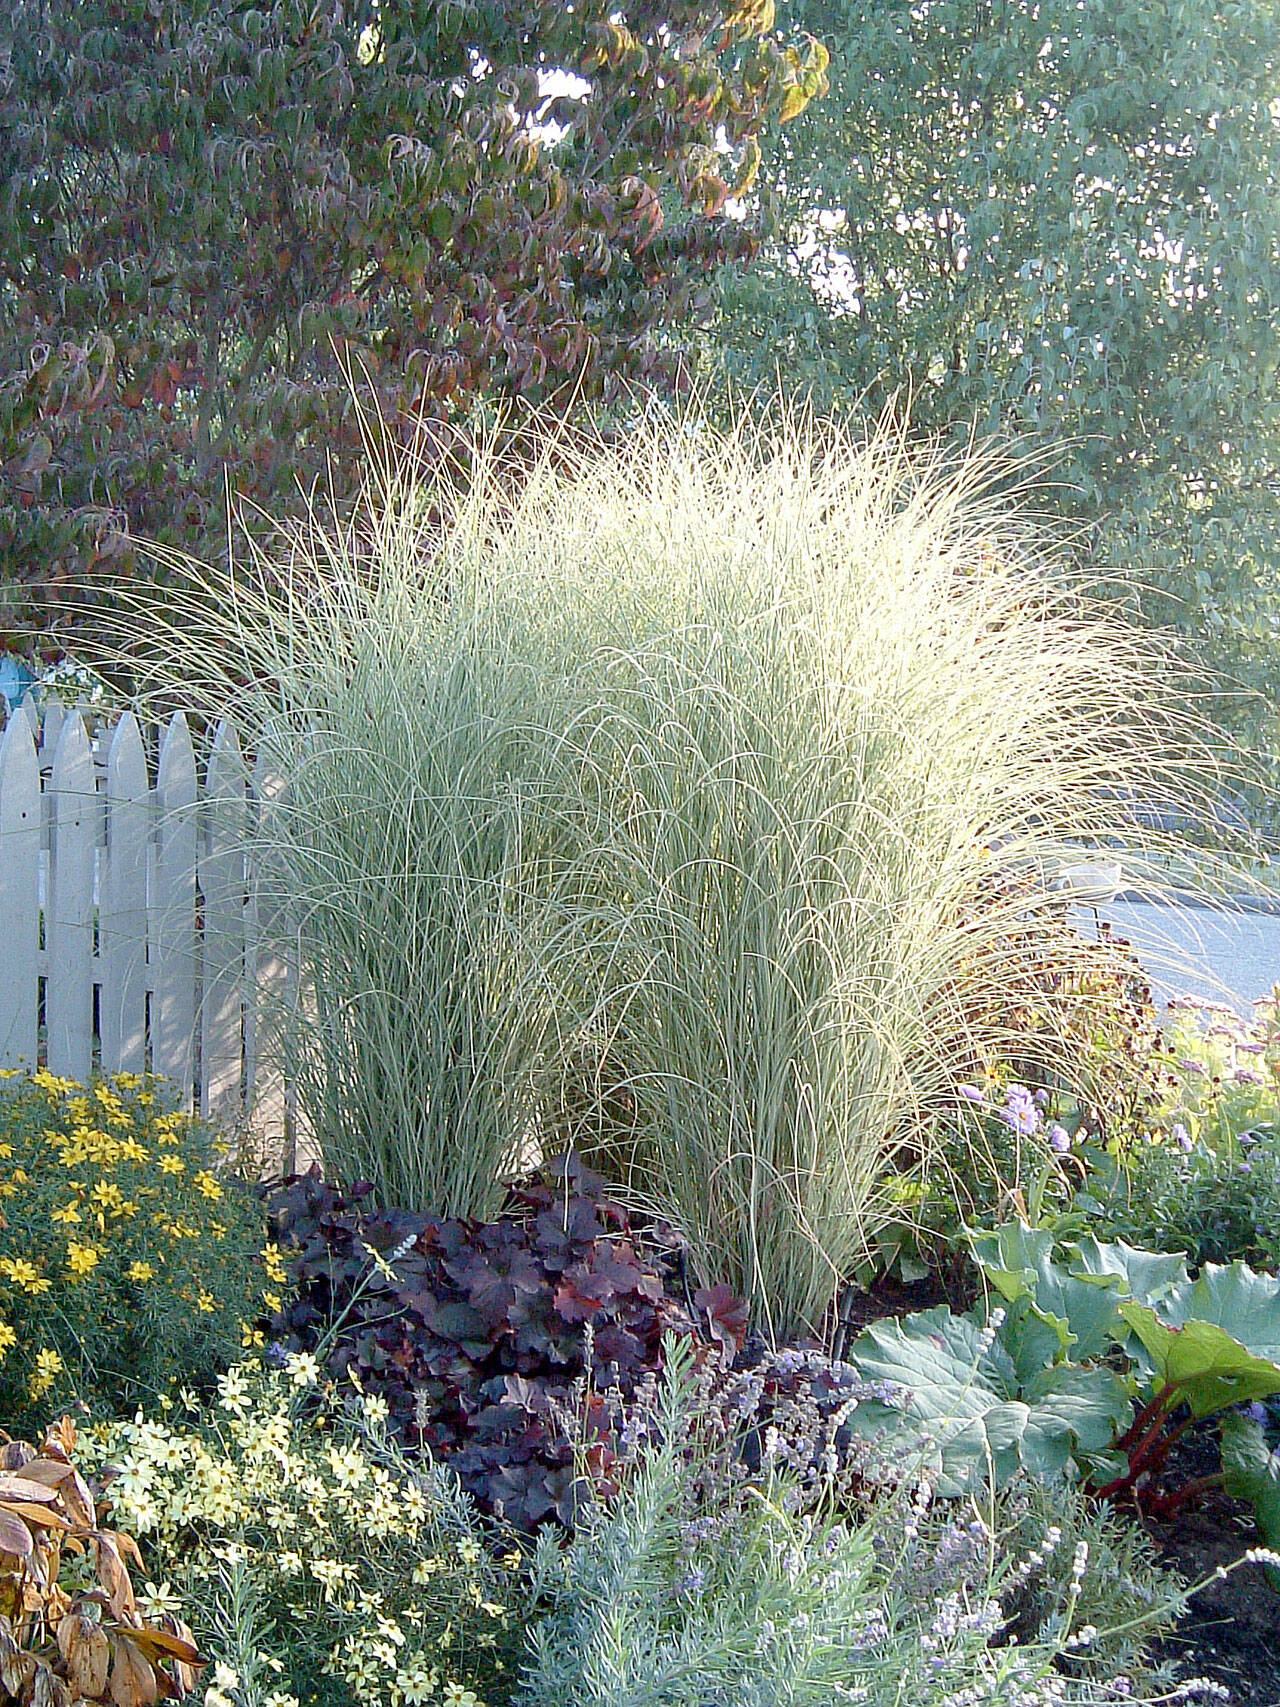 Miscanthus sinensis “Morning Light” is an adaptable large-scale grass that’s handsome and easy to grow. (Richie Steffen)